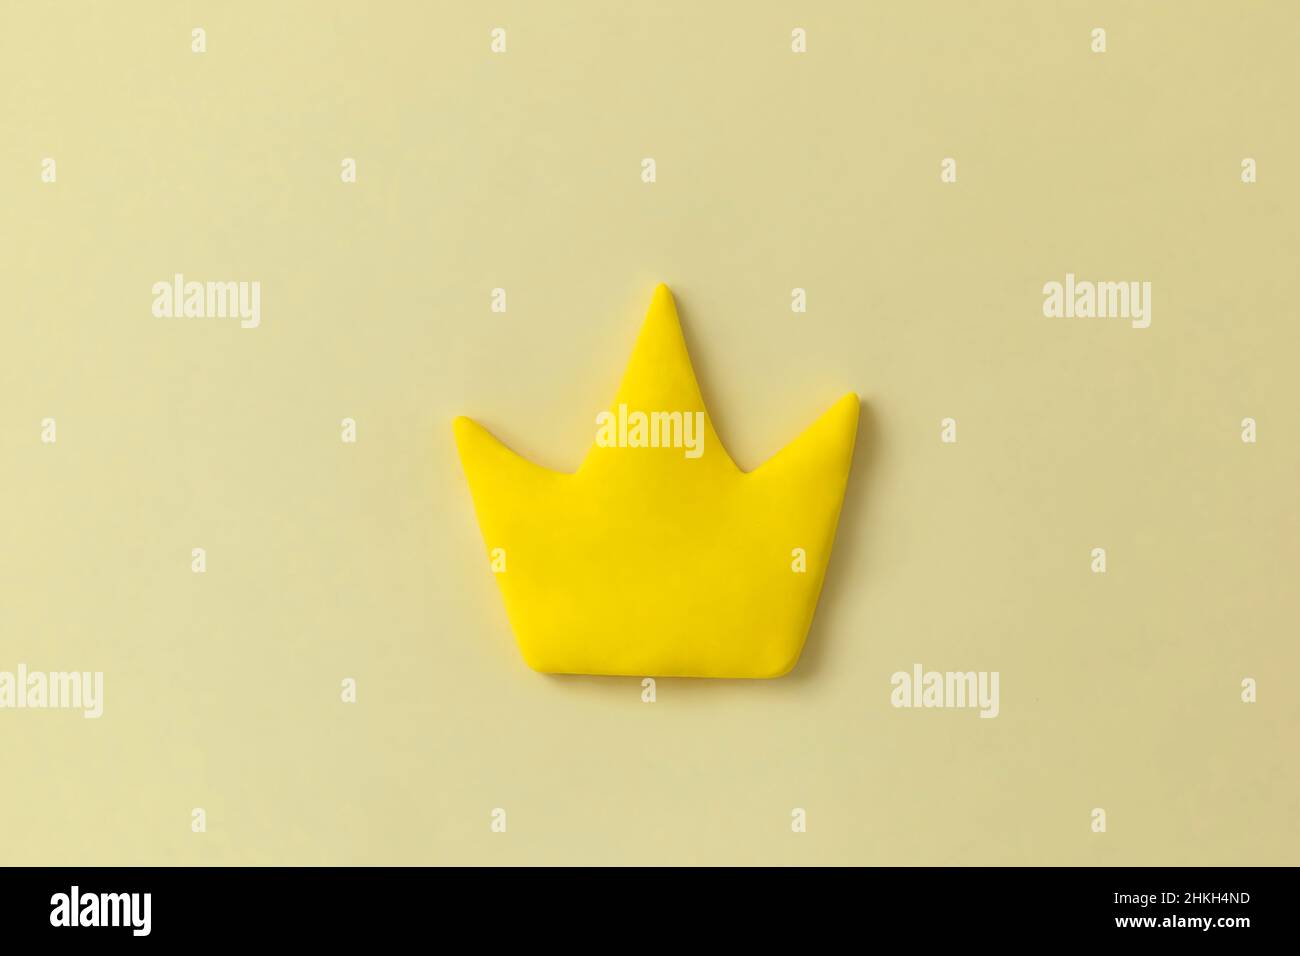 Simple 3d yellow crown symbol on yellow background. Concept of win and success, king sign, top rank quality status. Stock Photo